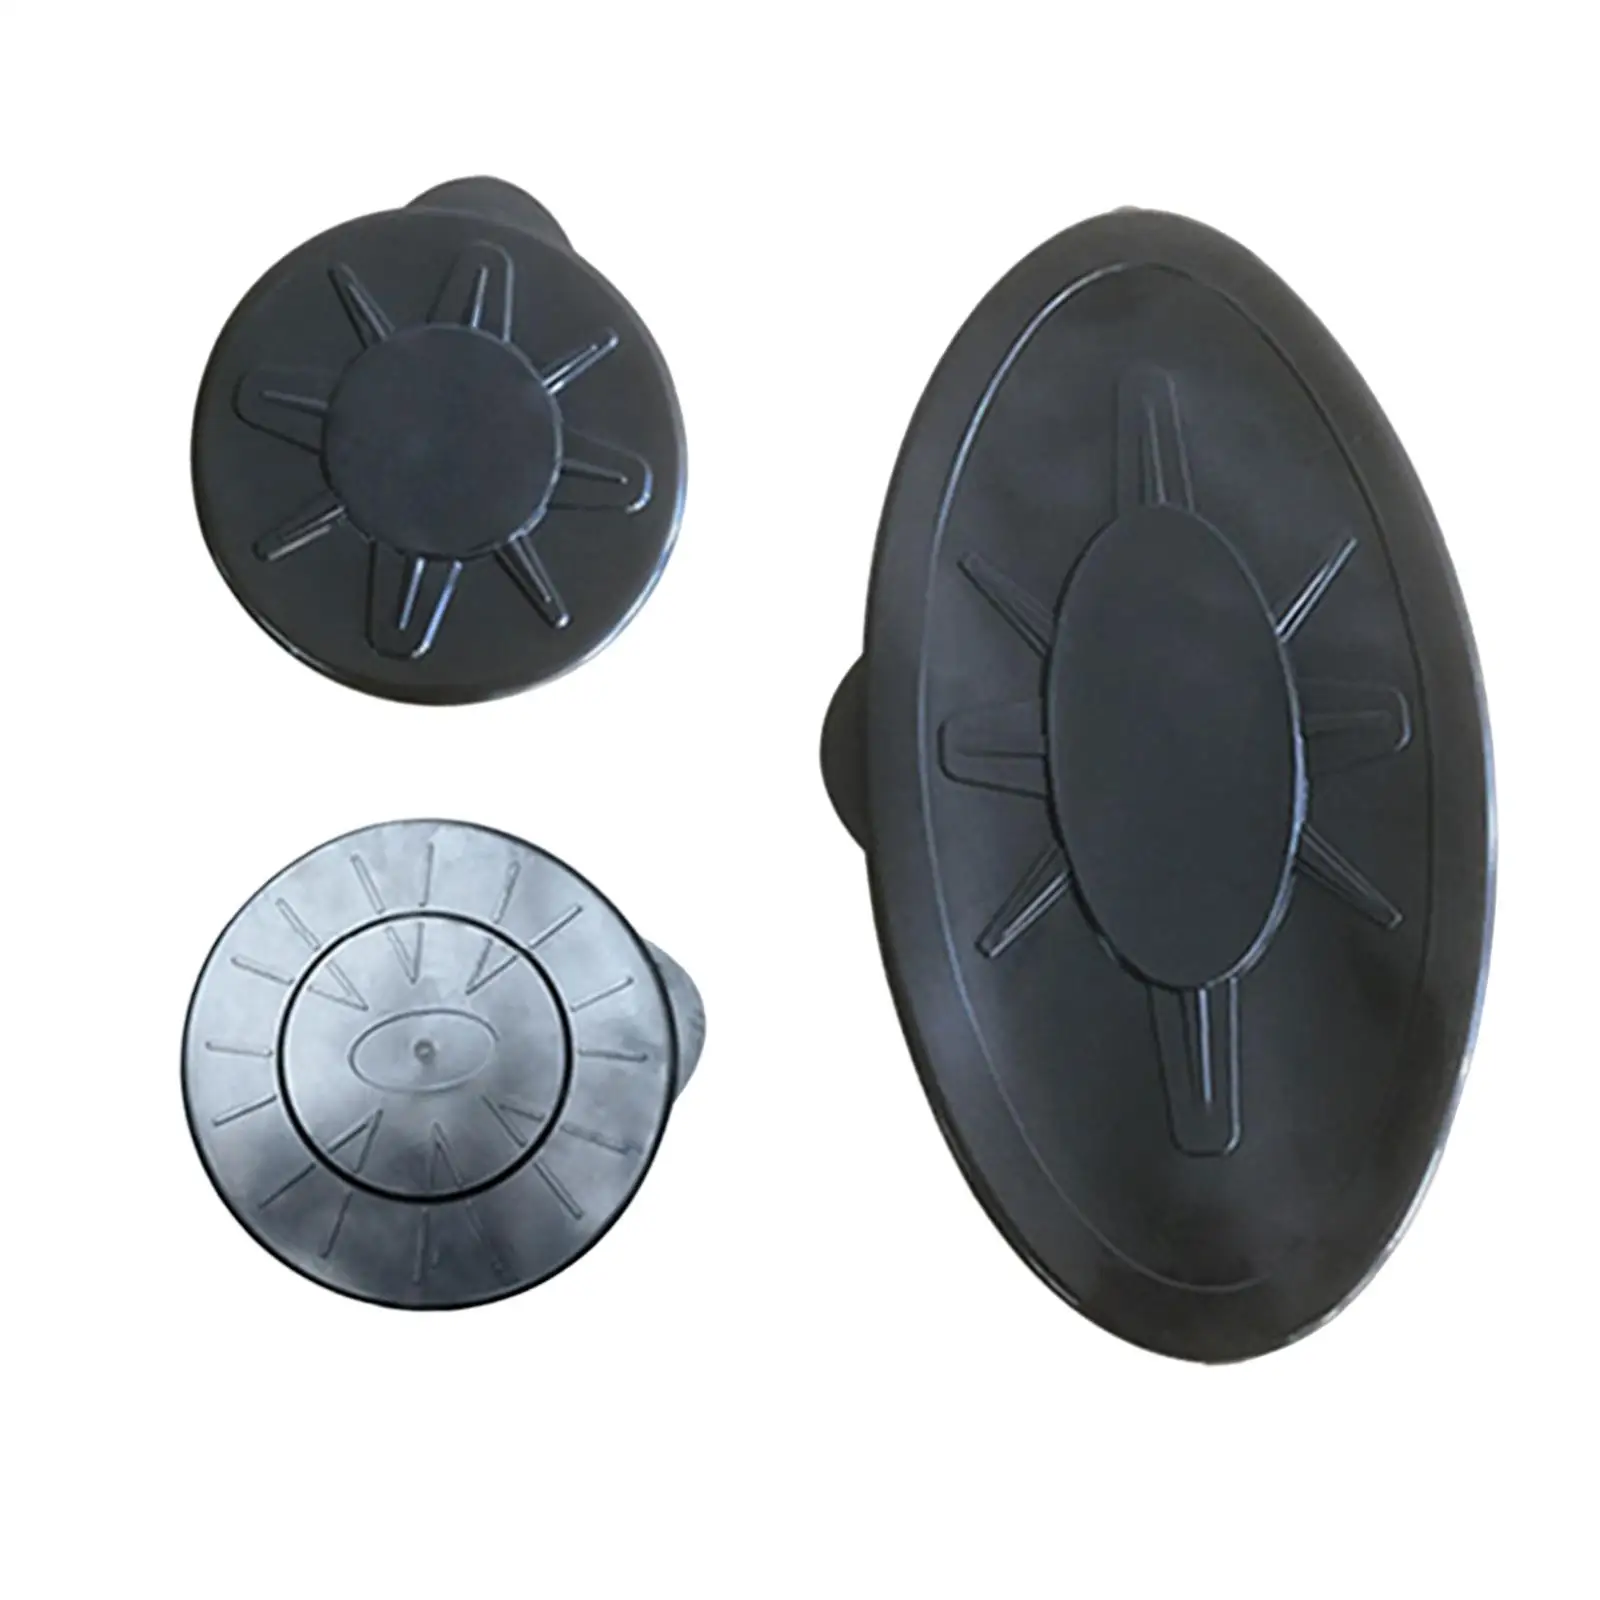 Kayak Hatches 9 inch Boat Sealing Hatch Parts Lock Hatch Round/Oval Deck Hatch Cover Replacement Hatches for Canoes Marine